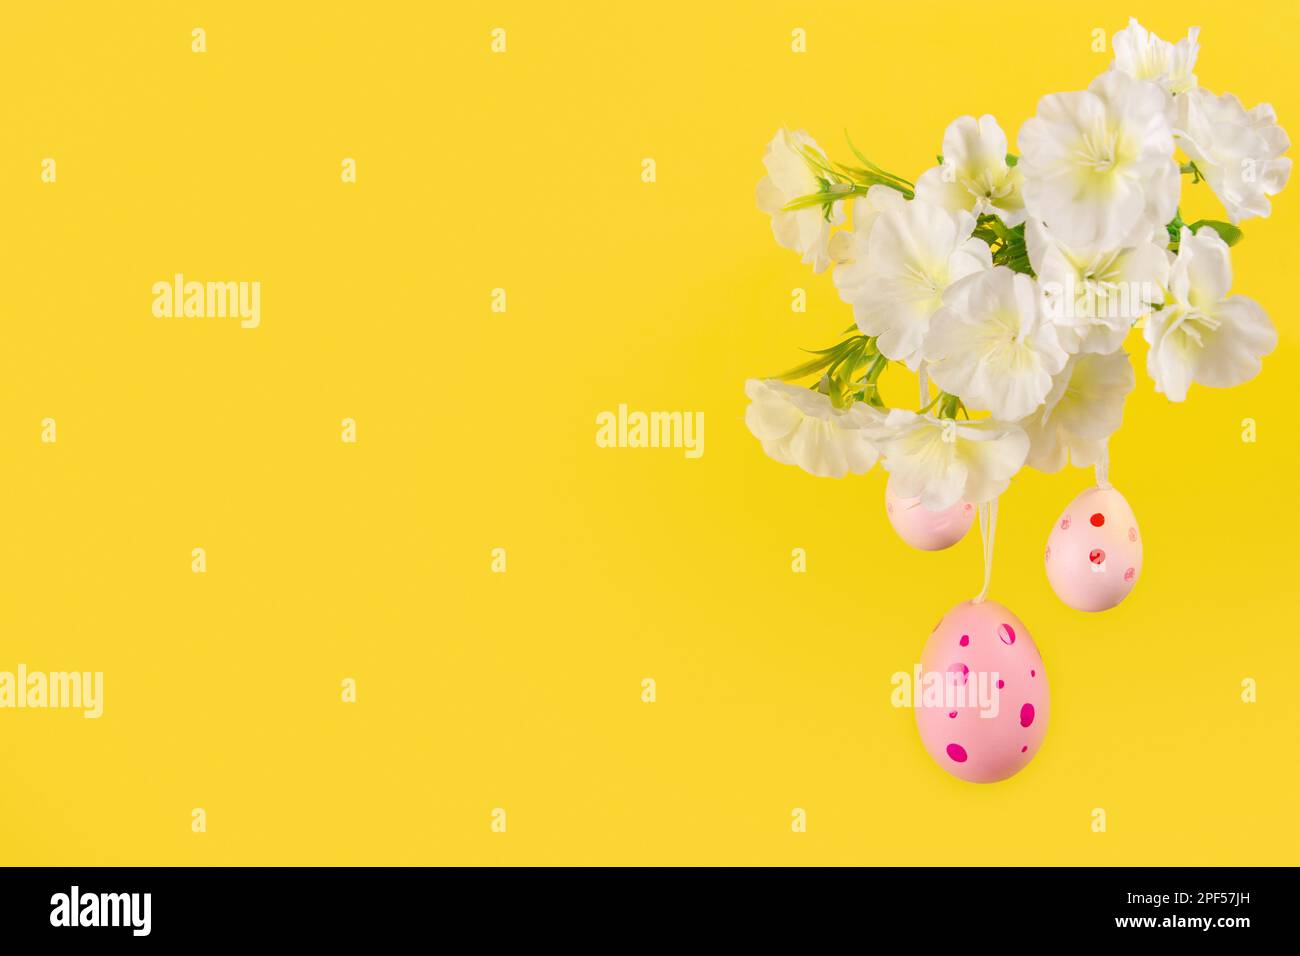 Captivating display of Easter cheer, depicting three pink eggs gently swaying from a leafy branch in bloom, set against a lively yellow hue background Stock Photo